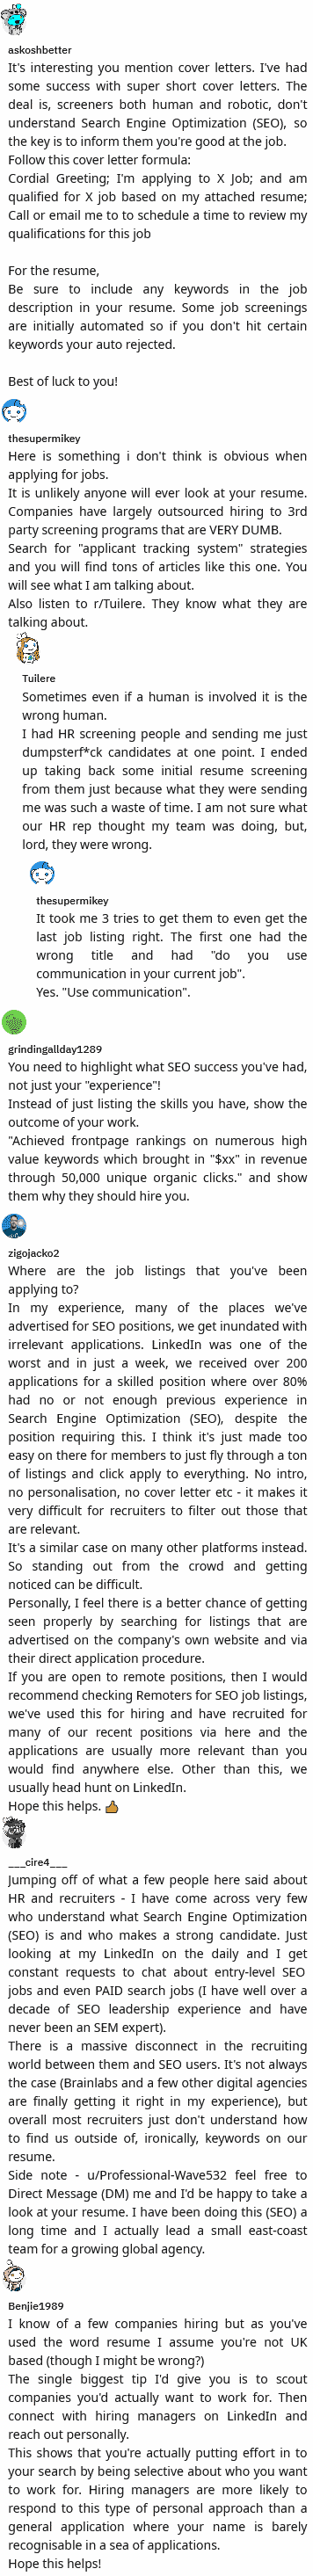 thoughts on applying to seo positions not getting responses